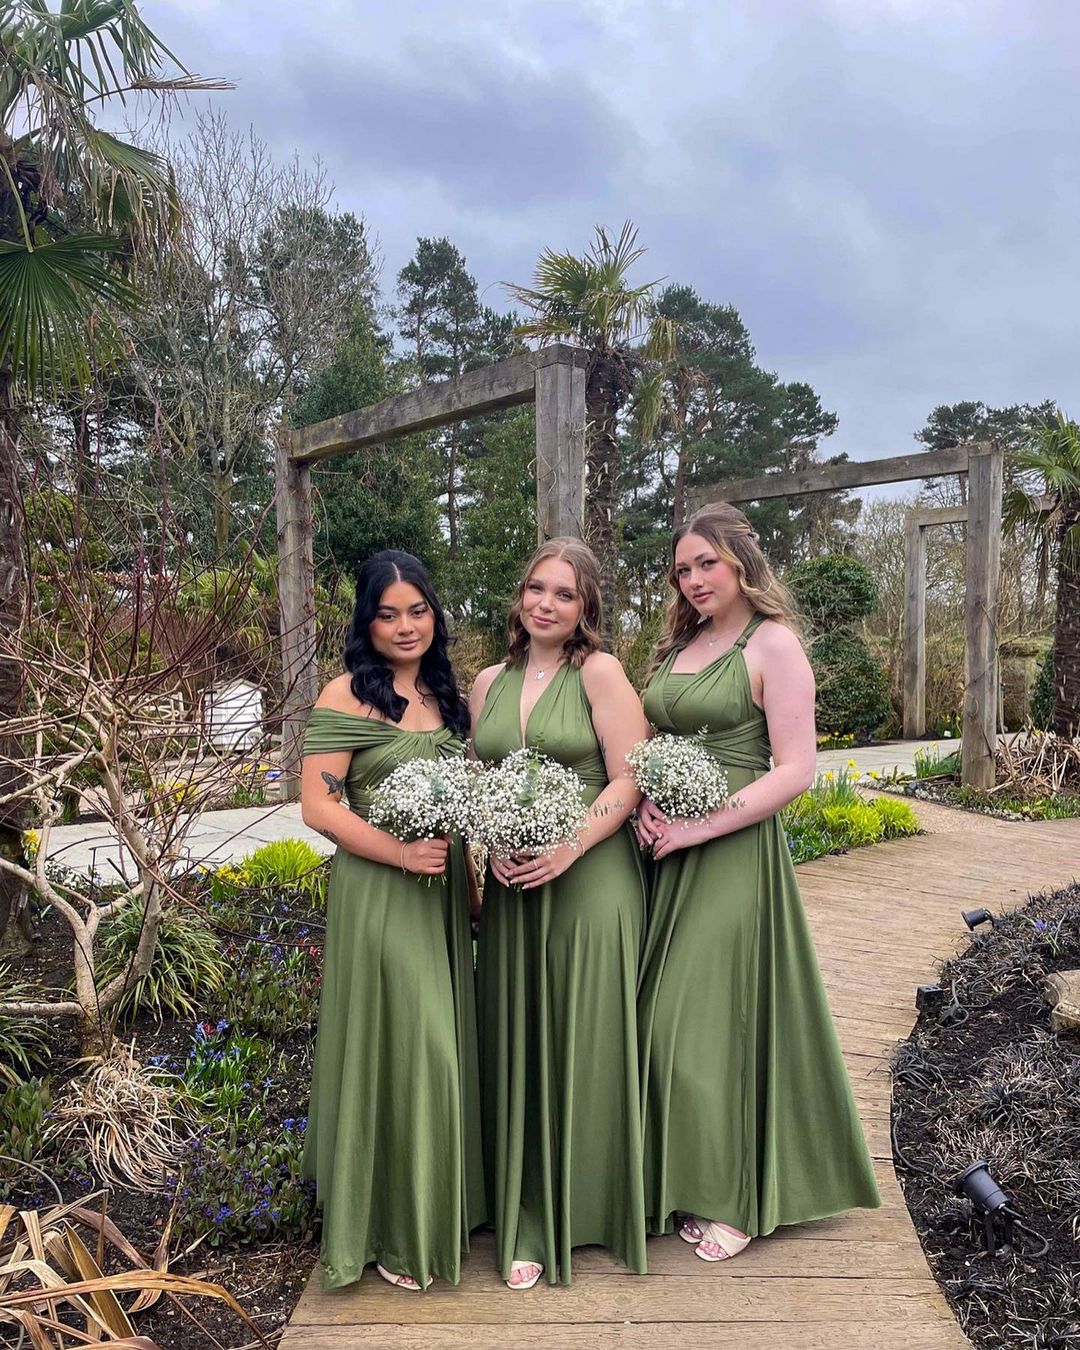 72styles Olive Green Infinity Bridesmaid Dress